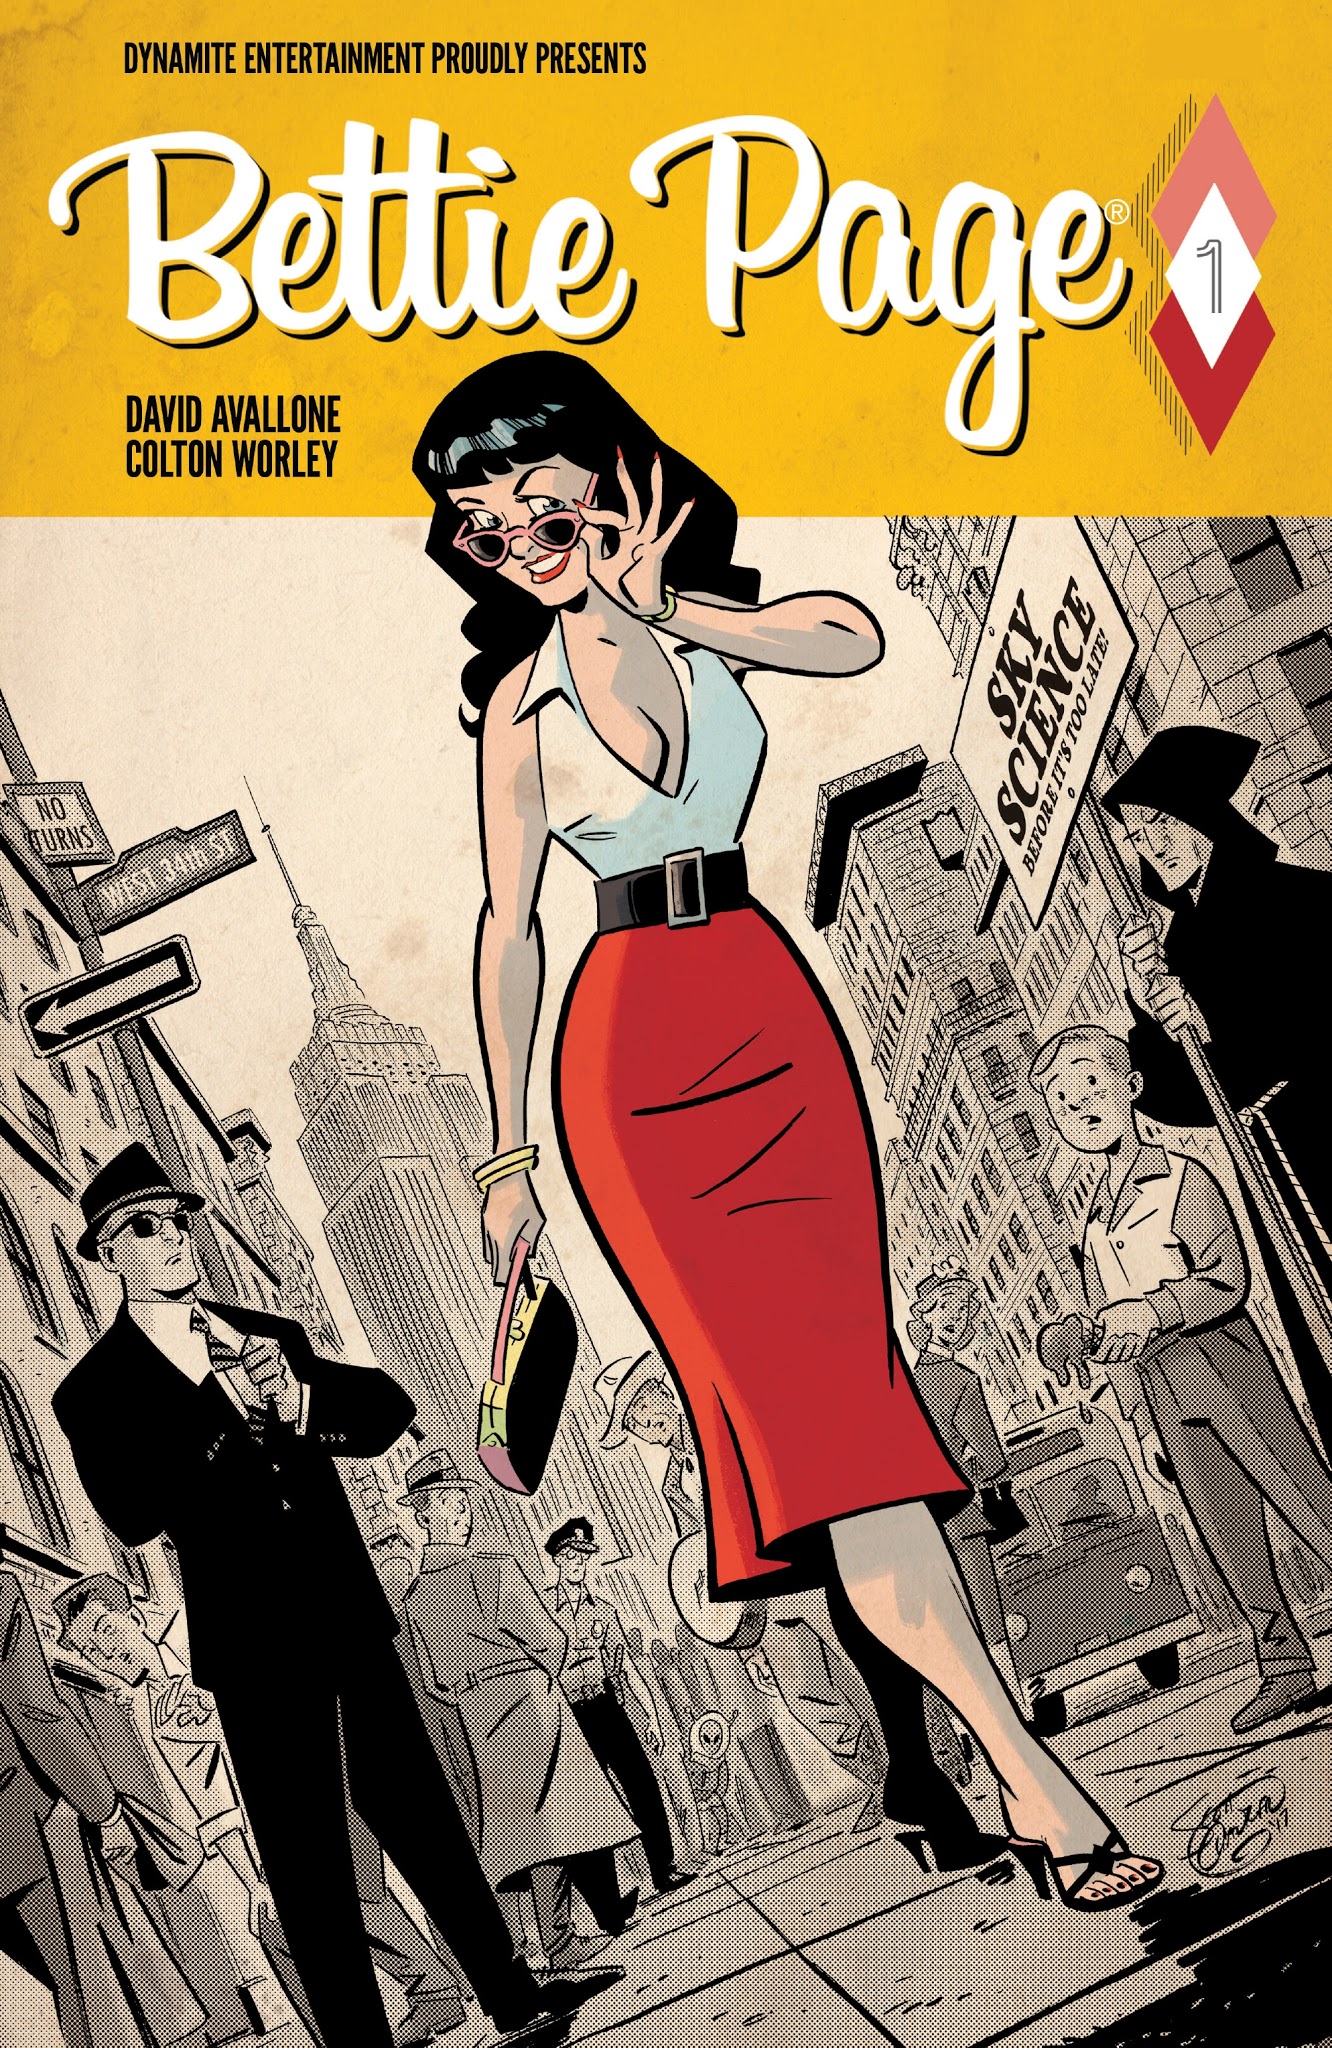 Read online Bettie Page comic -  Issue #1 - 3